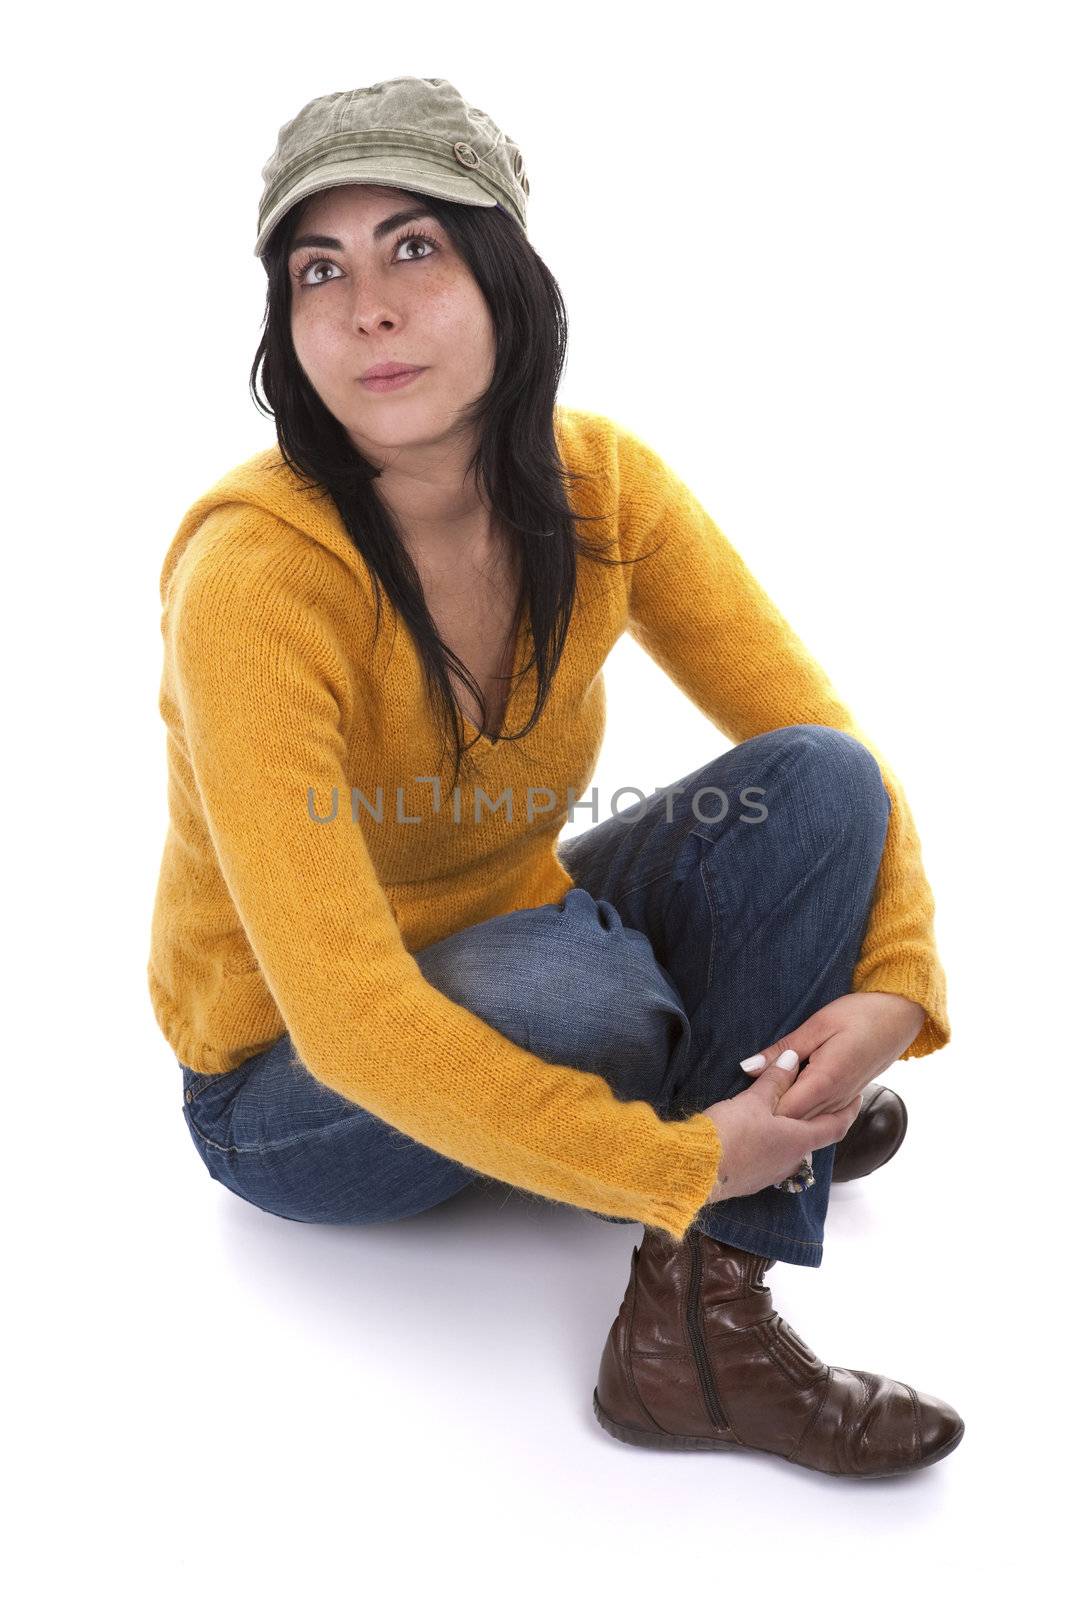 young casual woman with hat and yellow sweater by mlopes